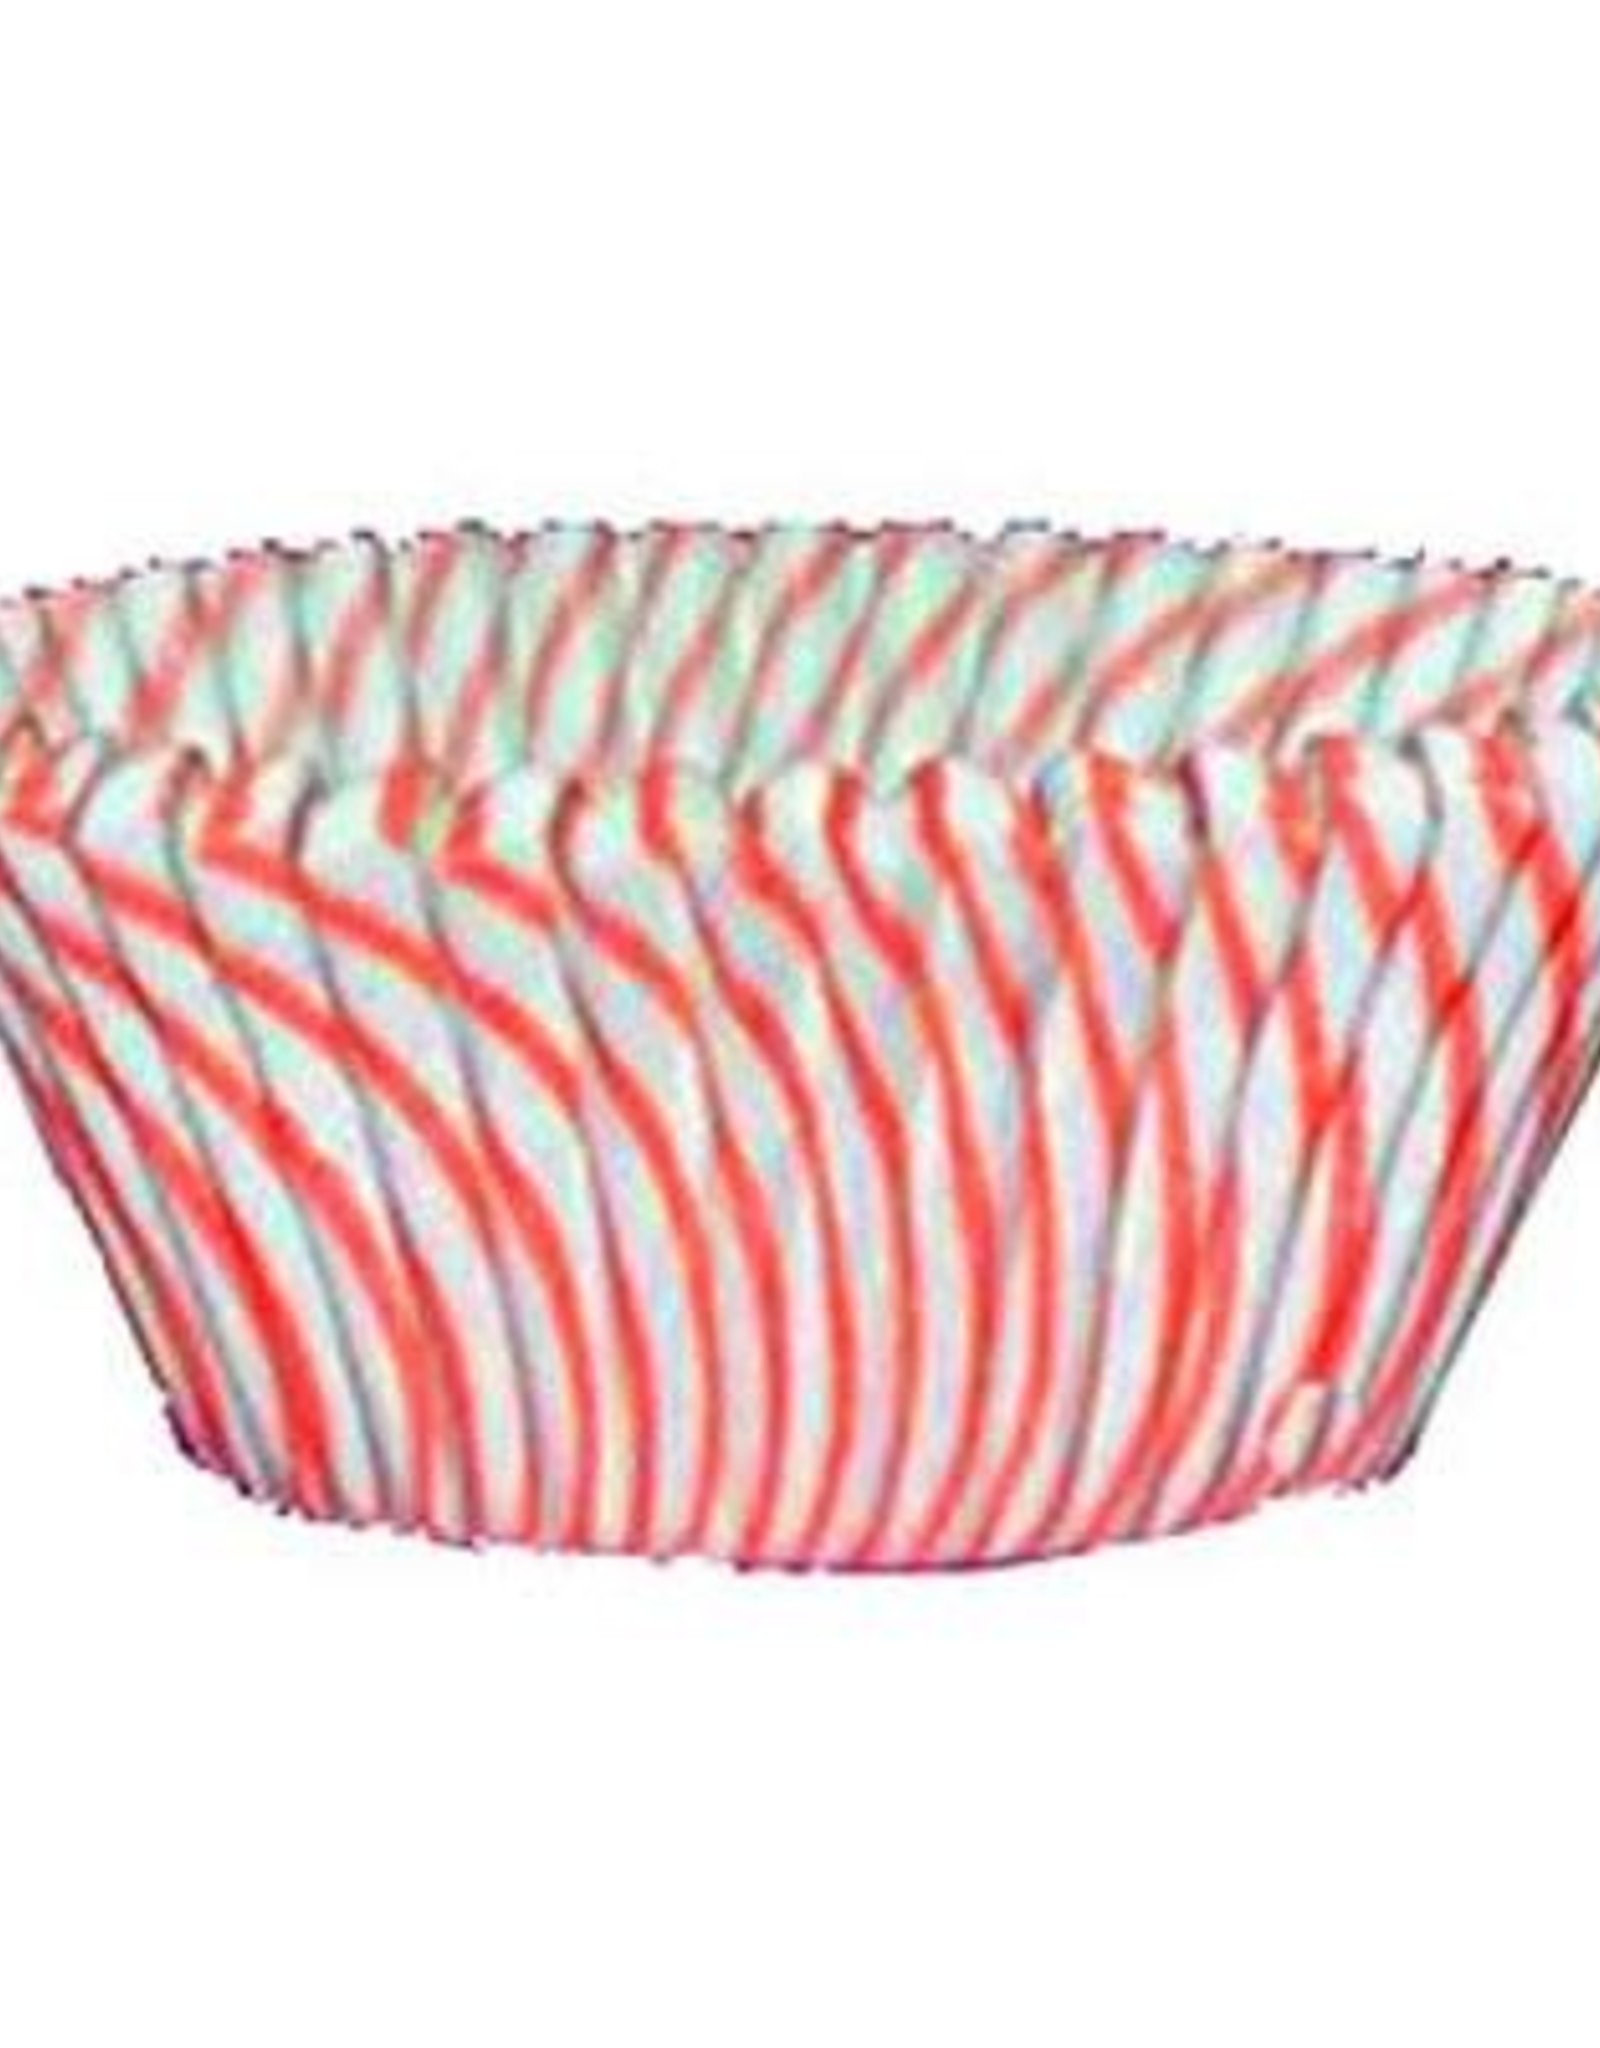 Red Stripe Baking Cups(30-35ct)